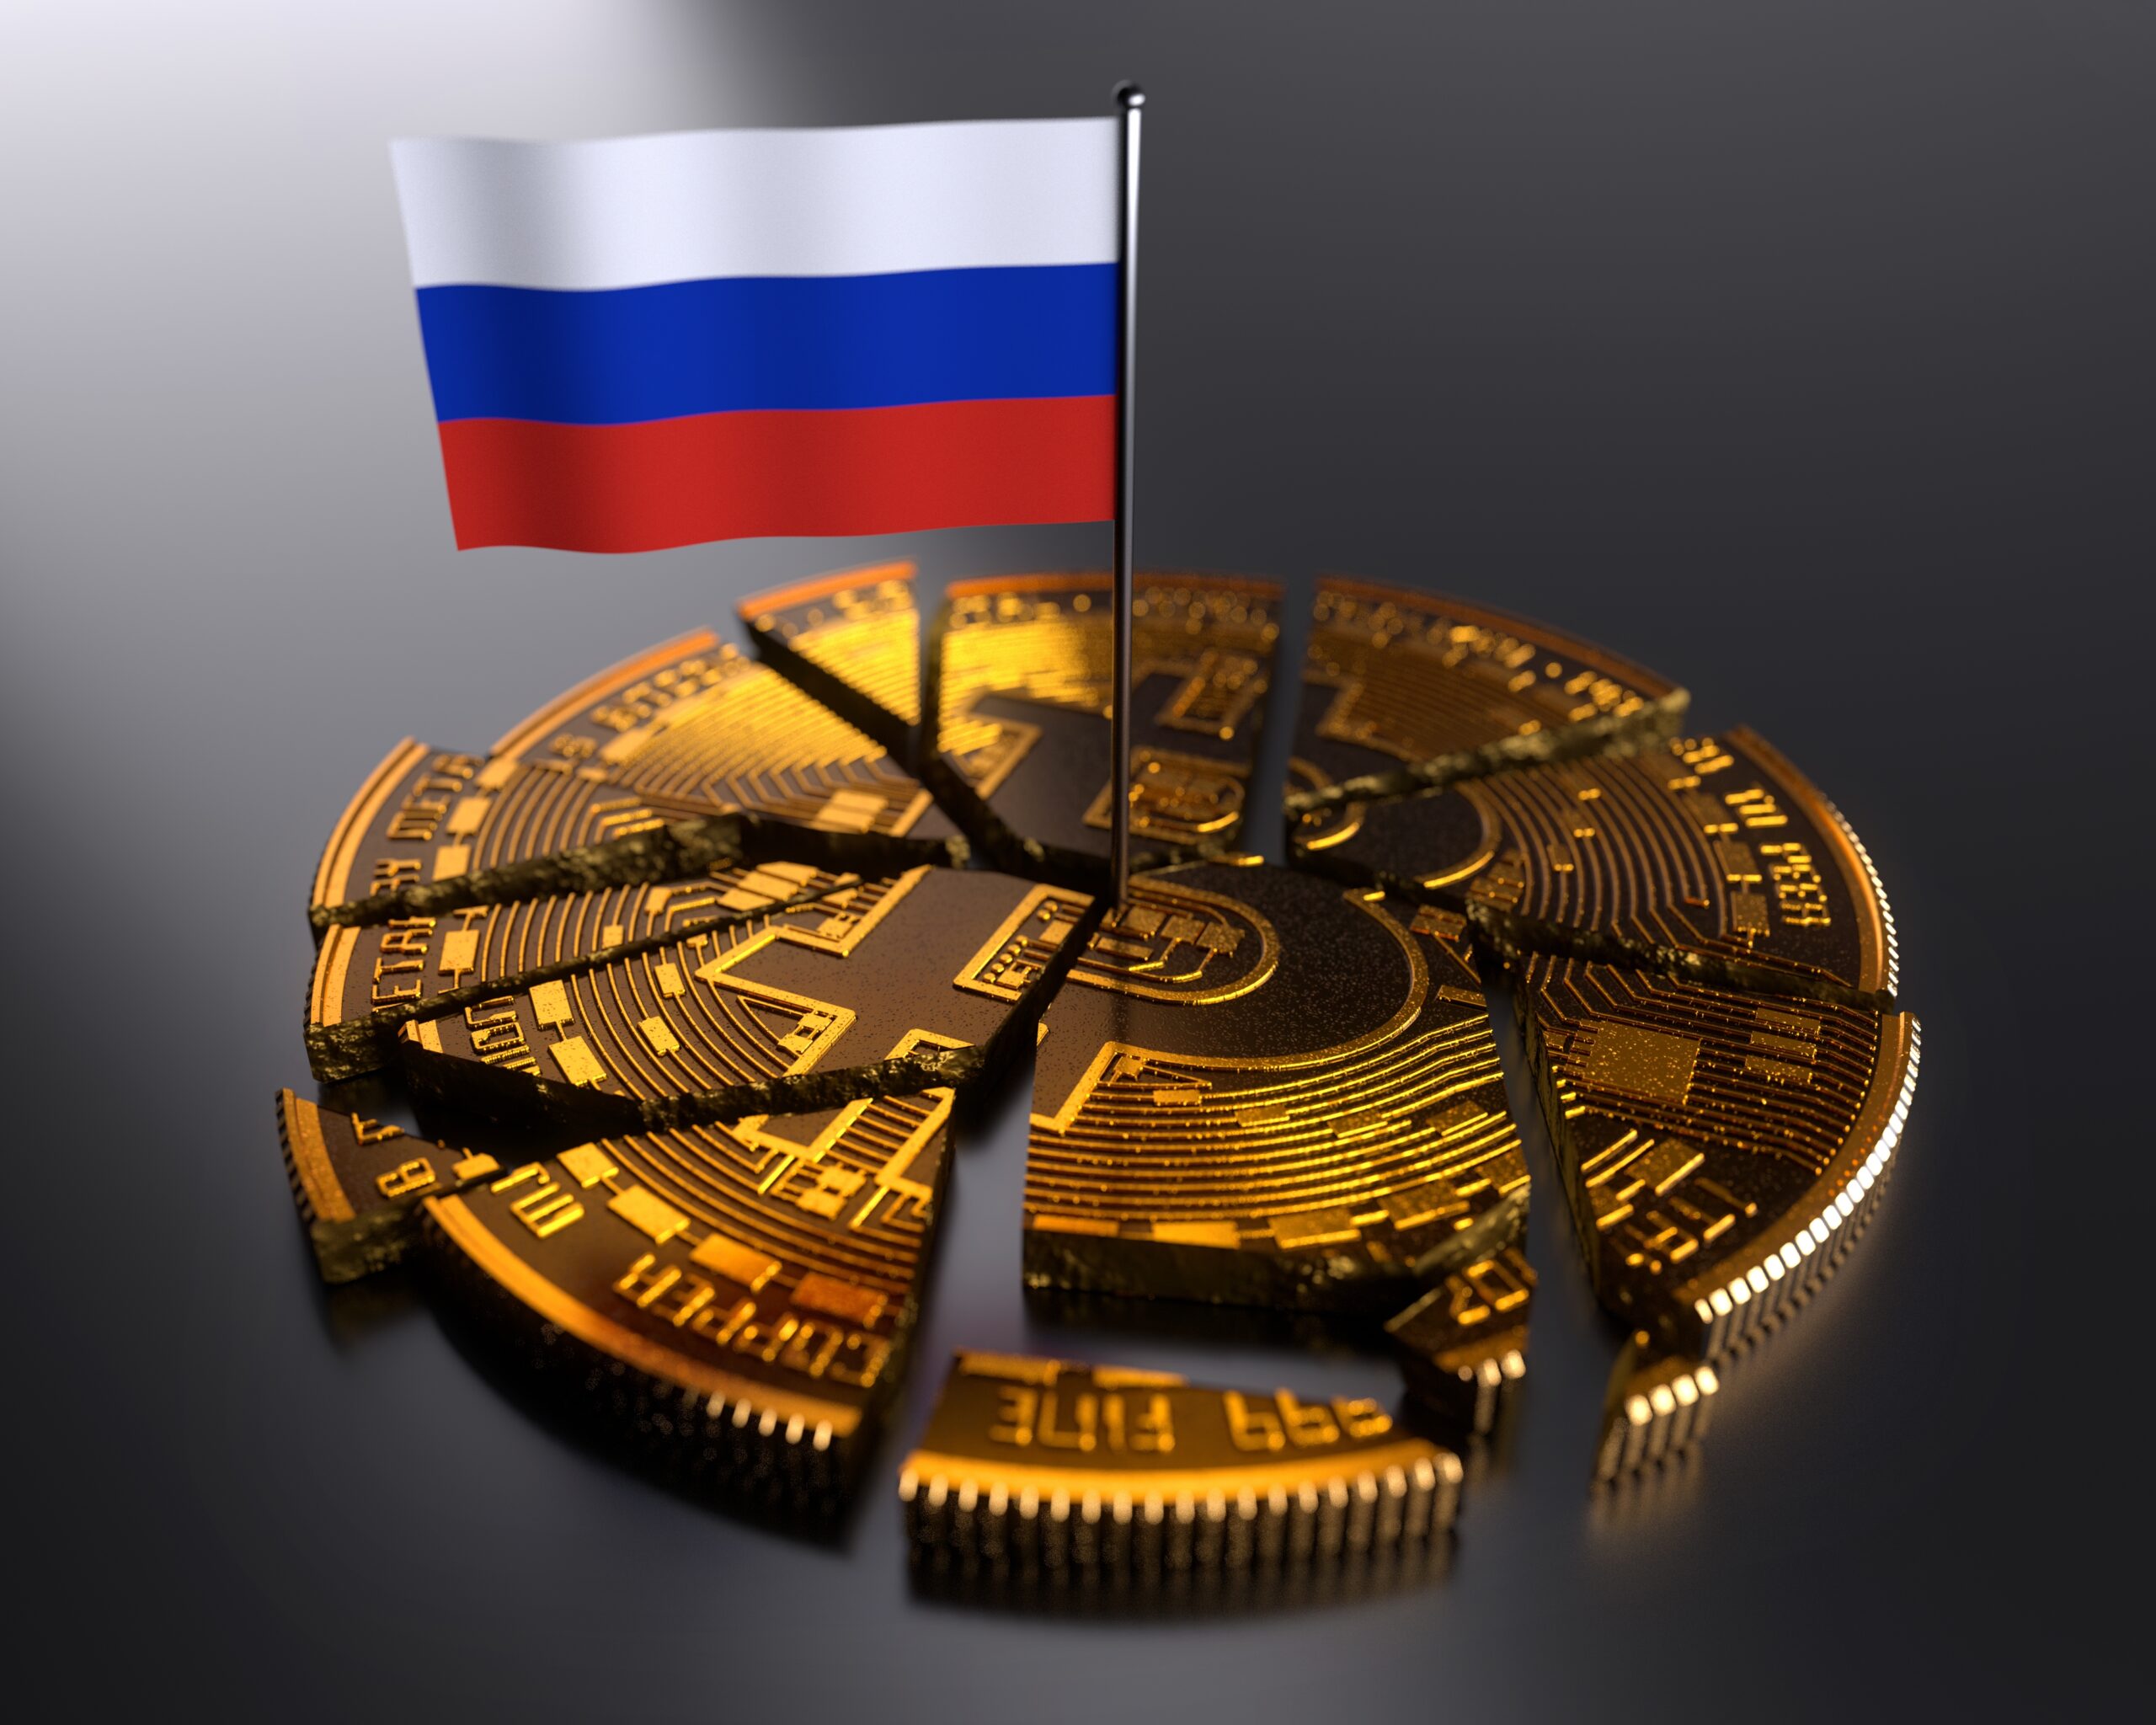 Russian finance ministry and central bank clash over how to police cryptocurrencies